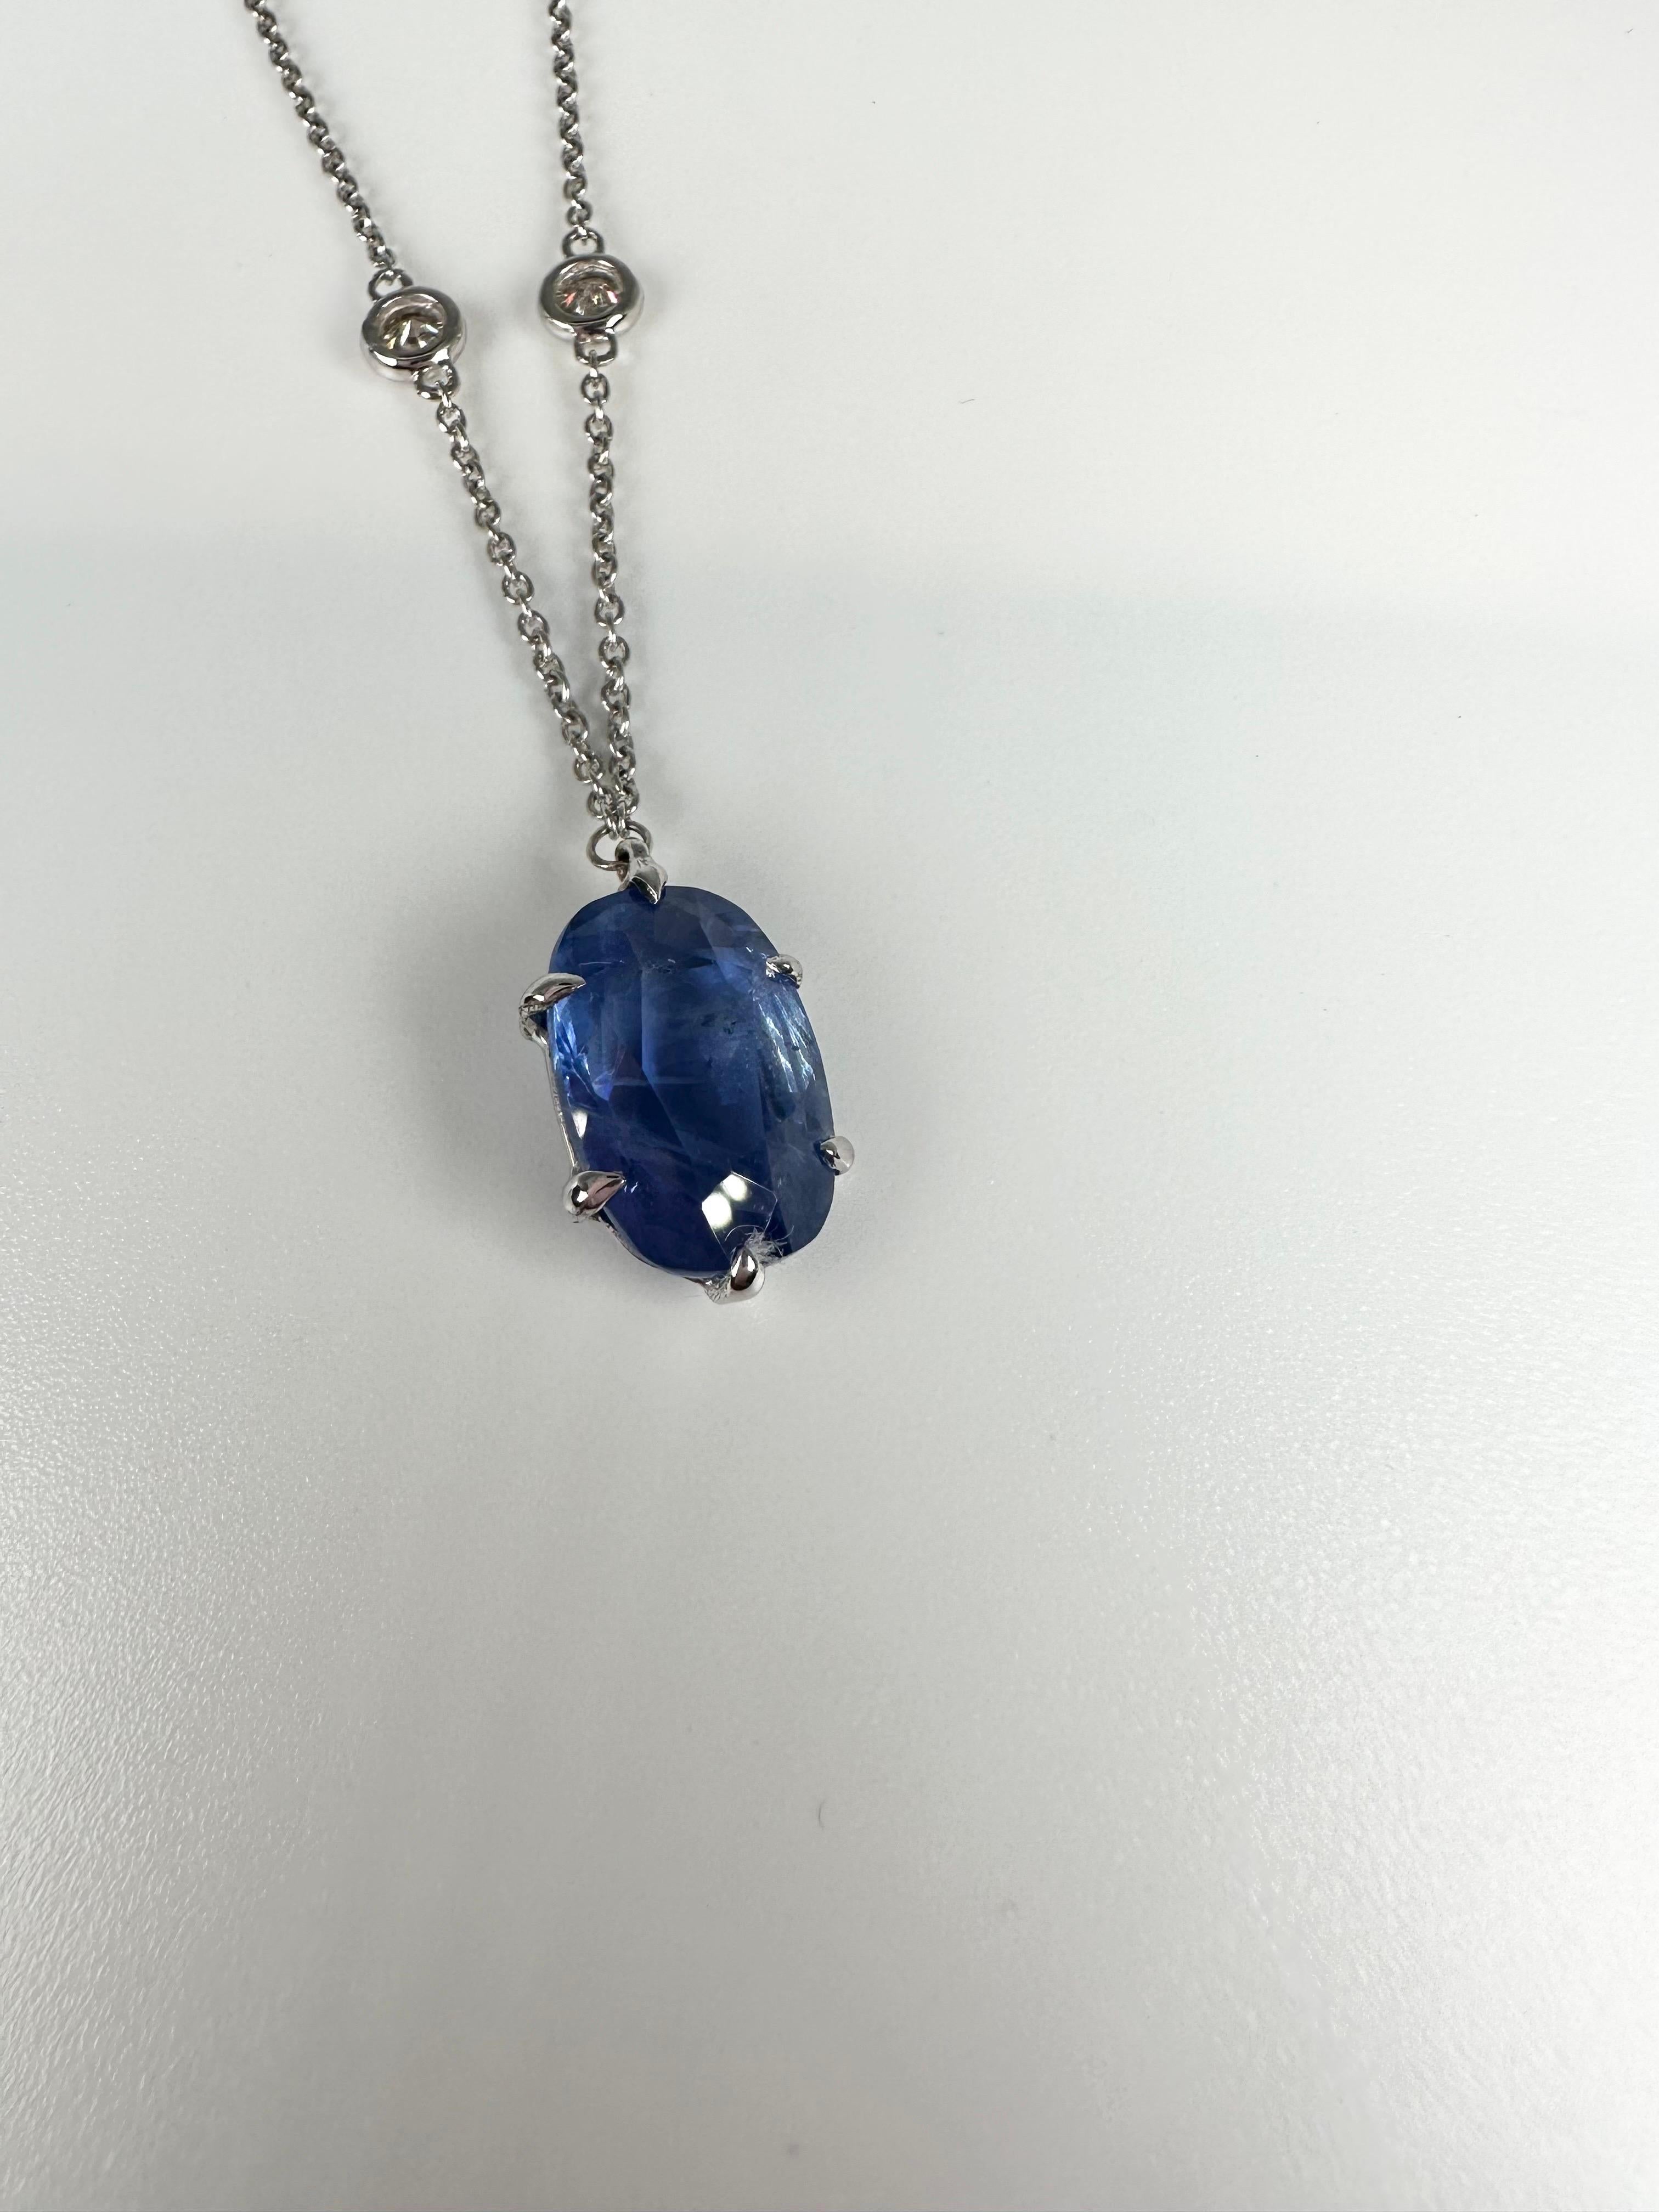 Rare find! Huge center sapphire of 5.14 carats made in modern tiger claw setting with diamond yard necklace in 14KT white gold, this piece is modern and royal at the same time! Unlike other necklaces this one can be worn with white shirt and jeans